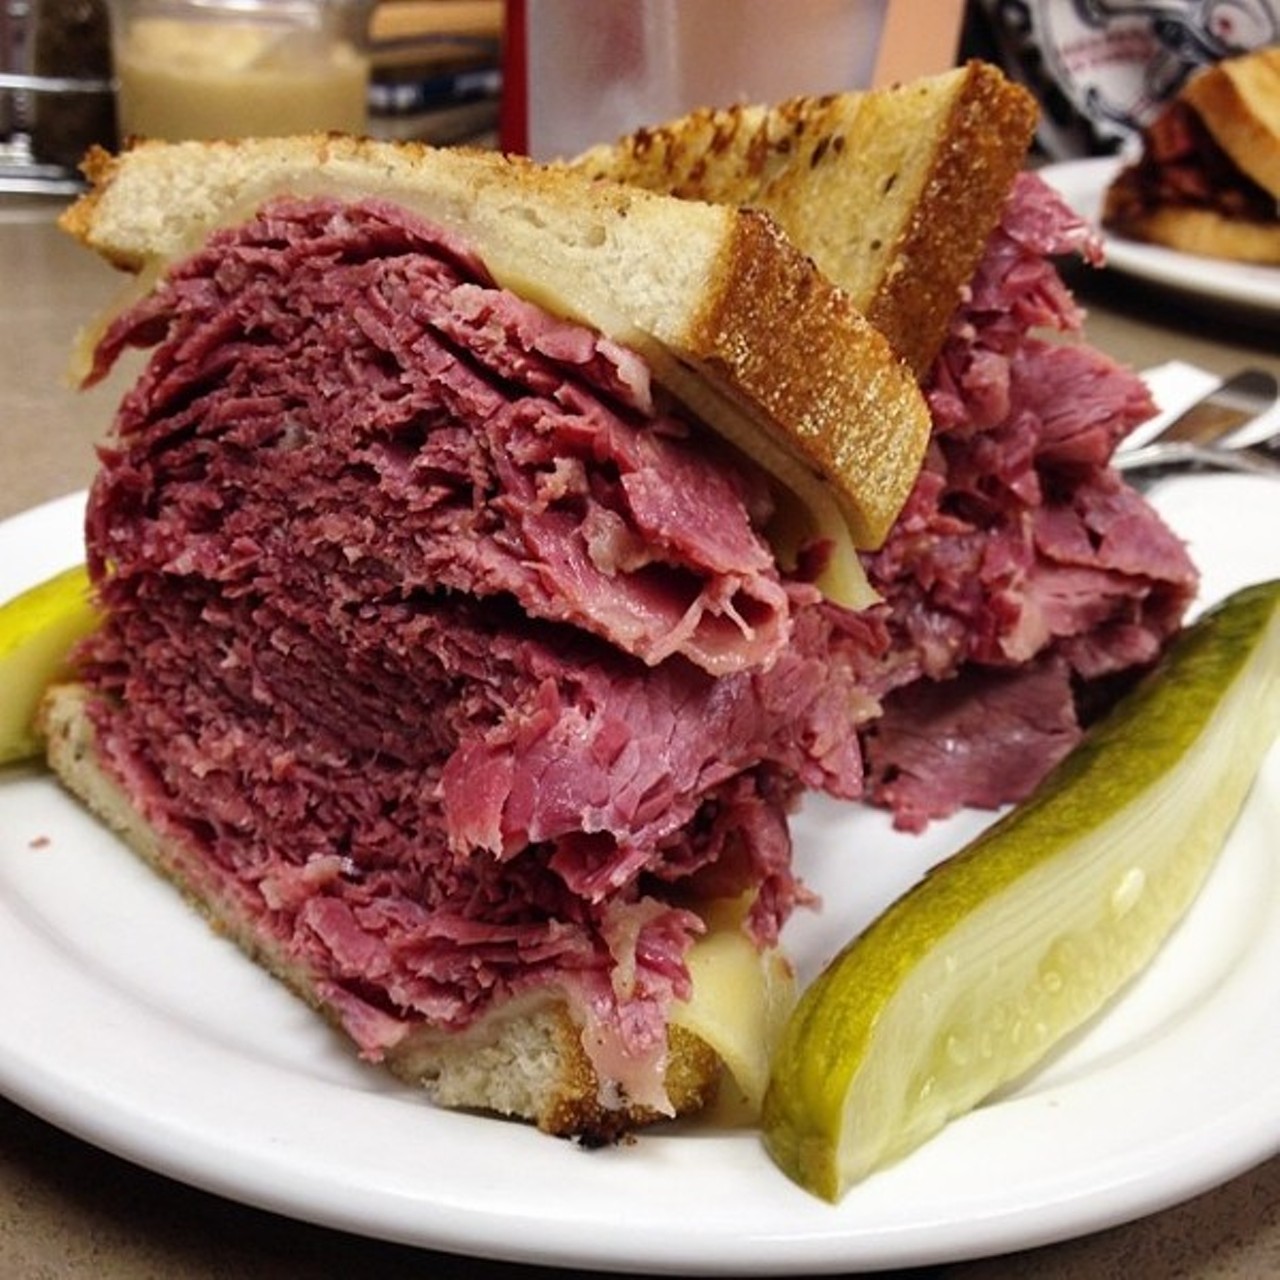  Slyman&#146;s
3106 St. Clair Ave., Cleveland
16 tons and what do you get? The best corned beef sandwich in Cleveland. They still slice every sandwich to order, and every sandwich still towers above much of the competition. Amaze your friends by ordering in Slymaneze: a &#147;natural&#148; means plain; &#147;original&#148; comes with mustard; and &#147;Smurf&#148; buys you one with Swiss and mustard (which ain&#146;t kosher, by the way).
Photo via Scene Archives